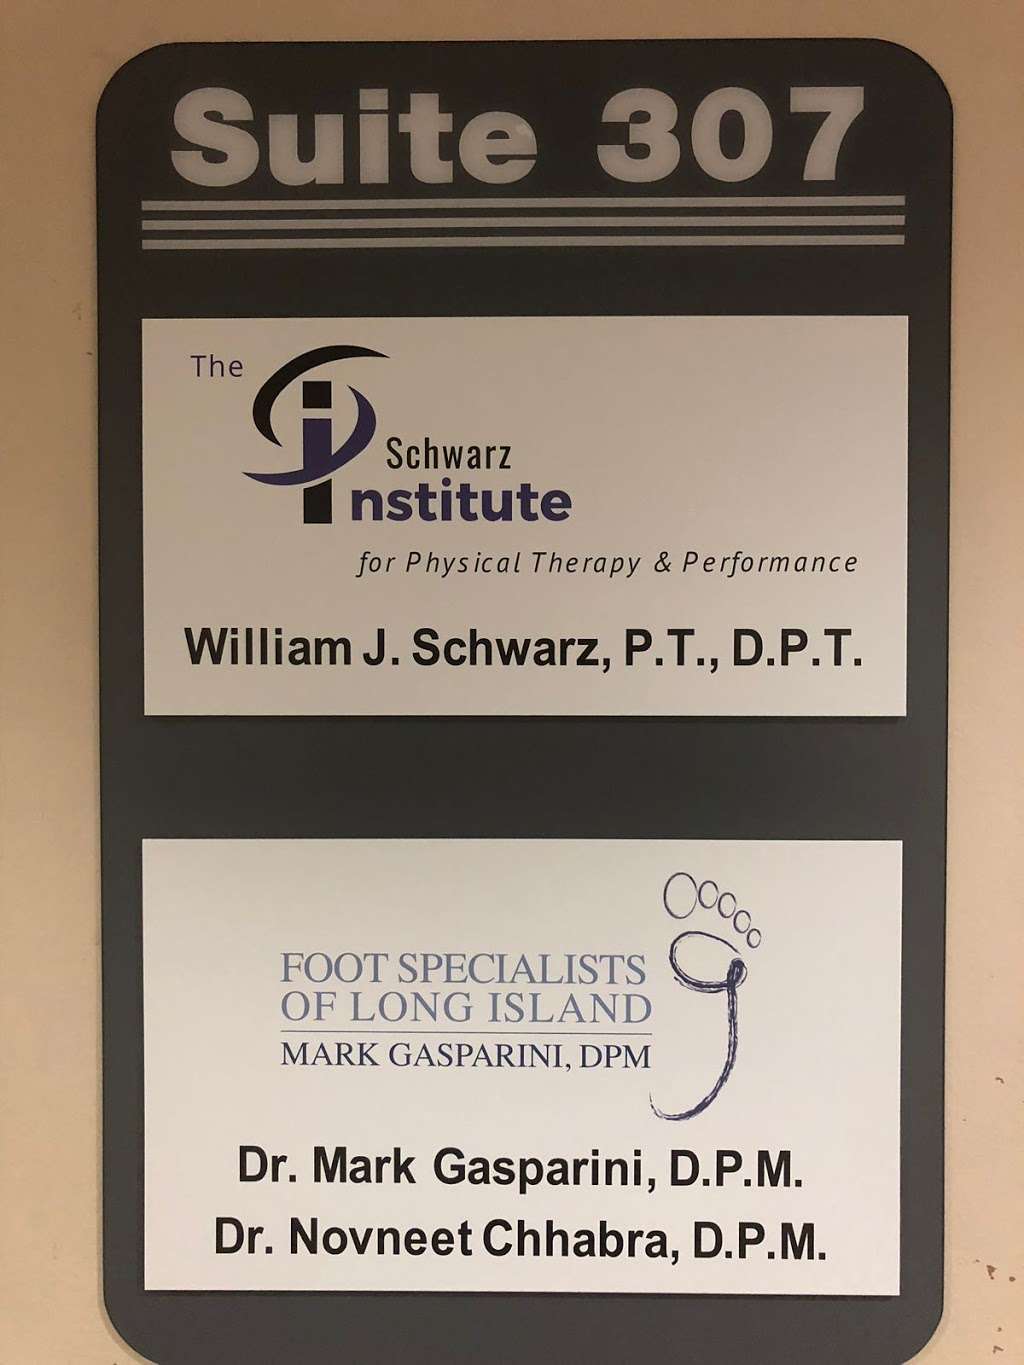 Foot Specialists of Long Island | 2000 N Village Ave Suite 307, Rockville Centre, NY 11570, USA | Phone: (516) 804-9038